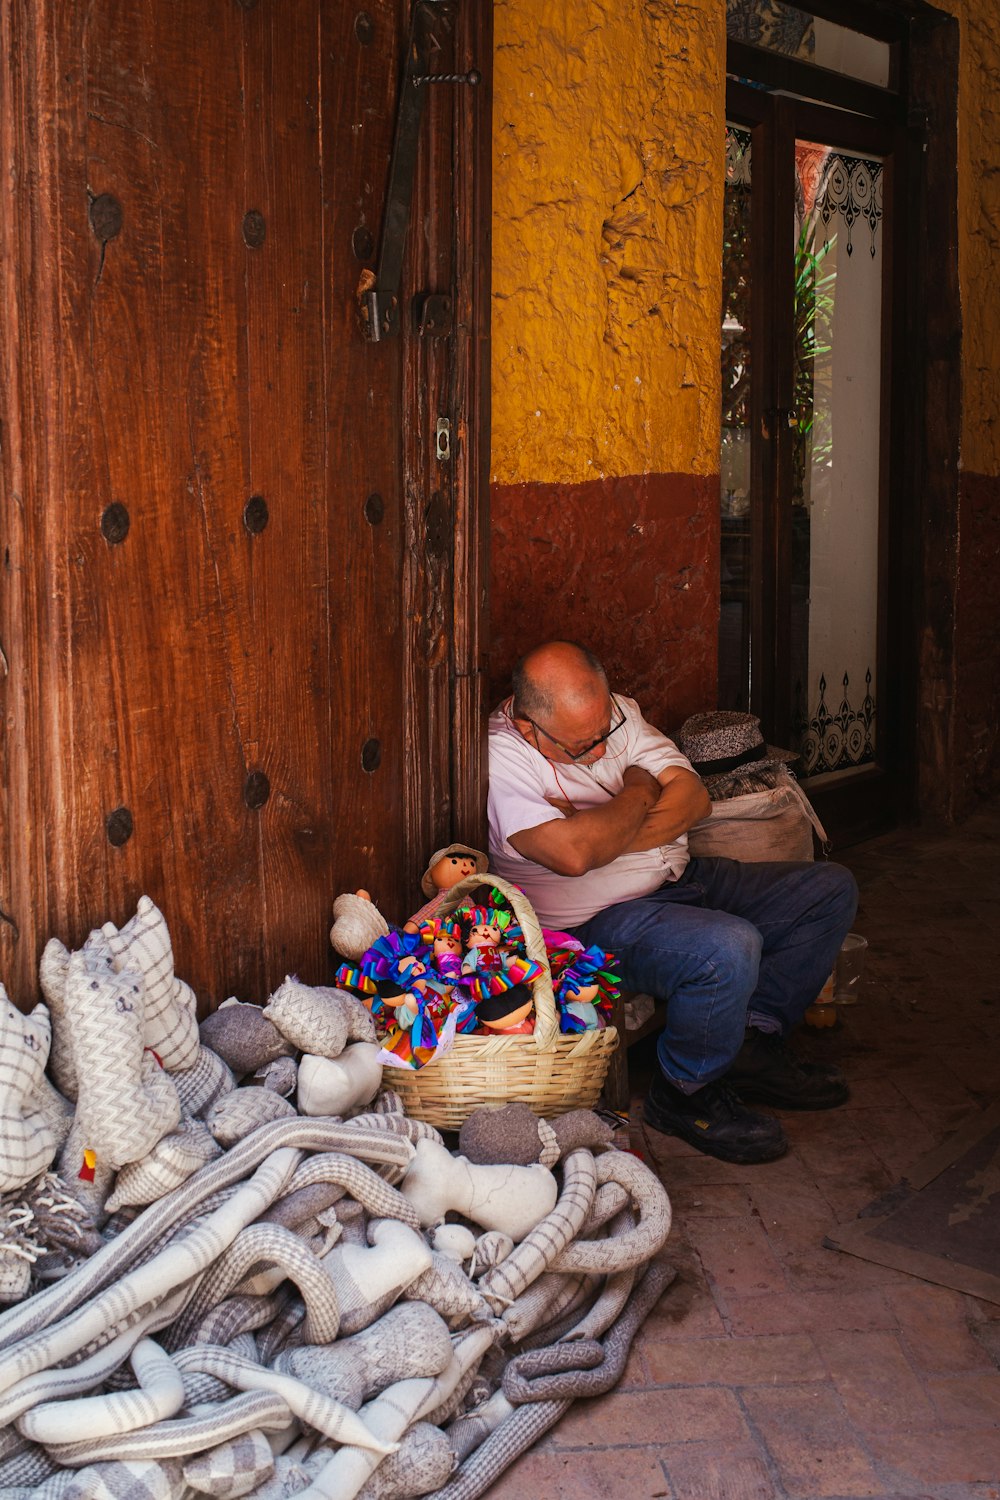 a person sitting on a chair with a basket of stuffed animals